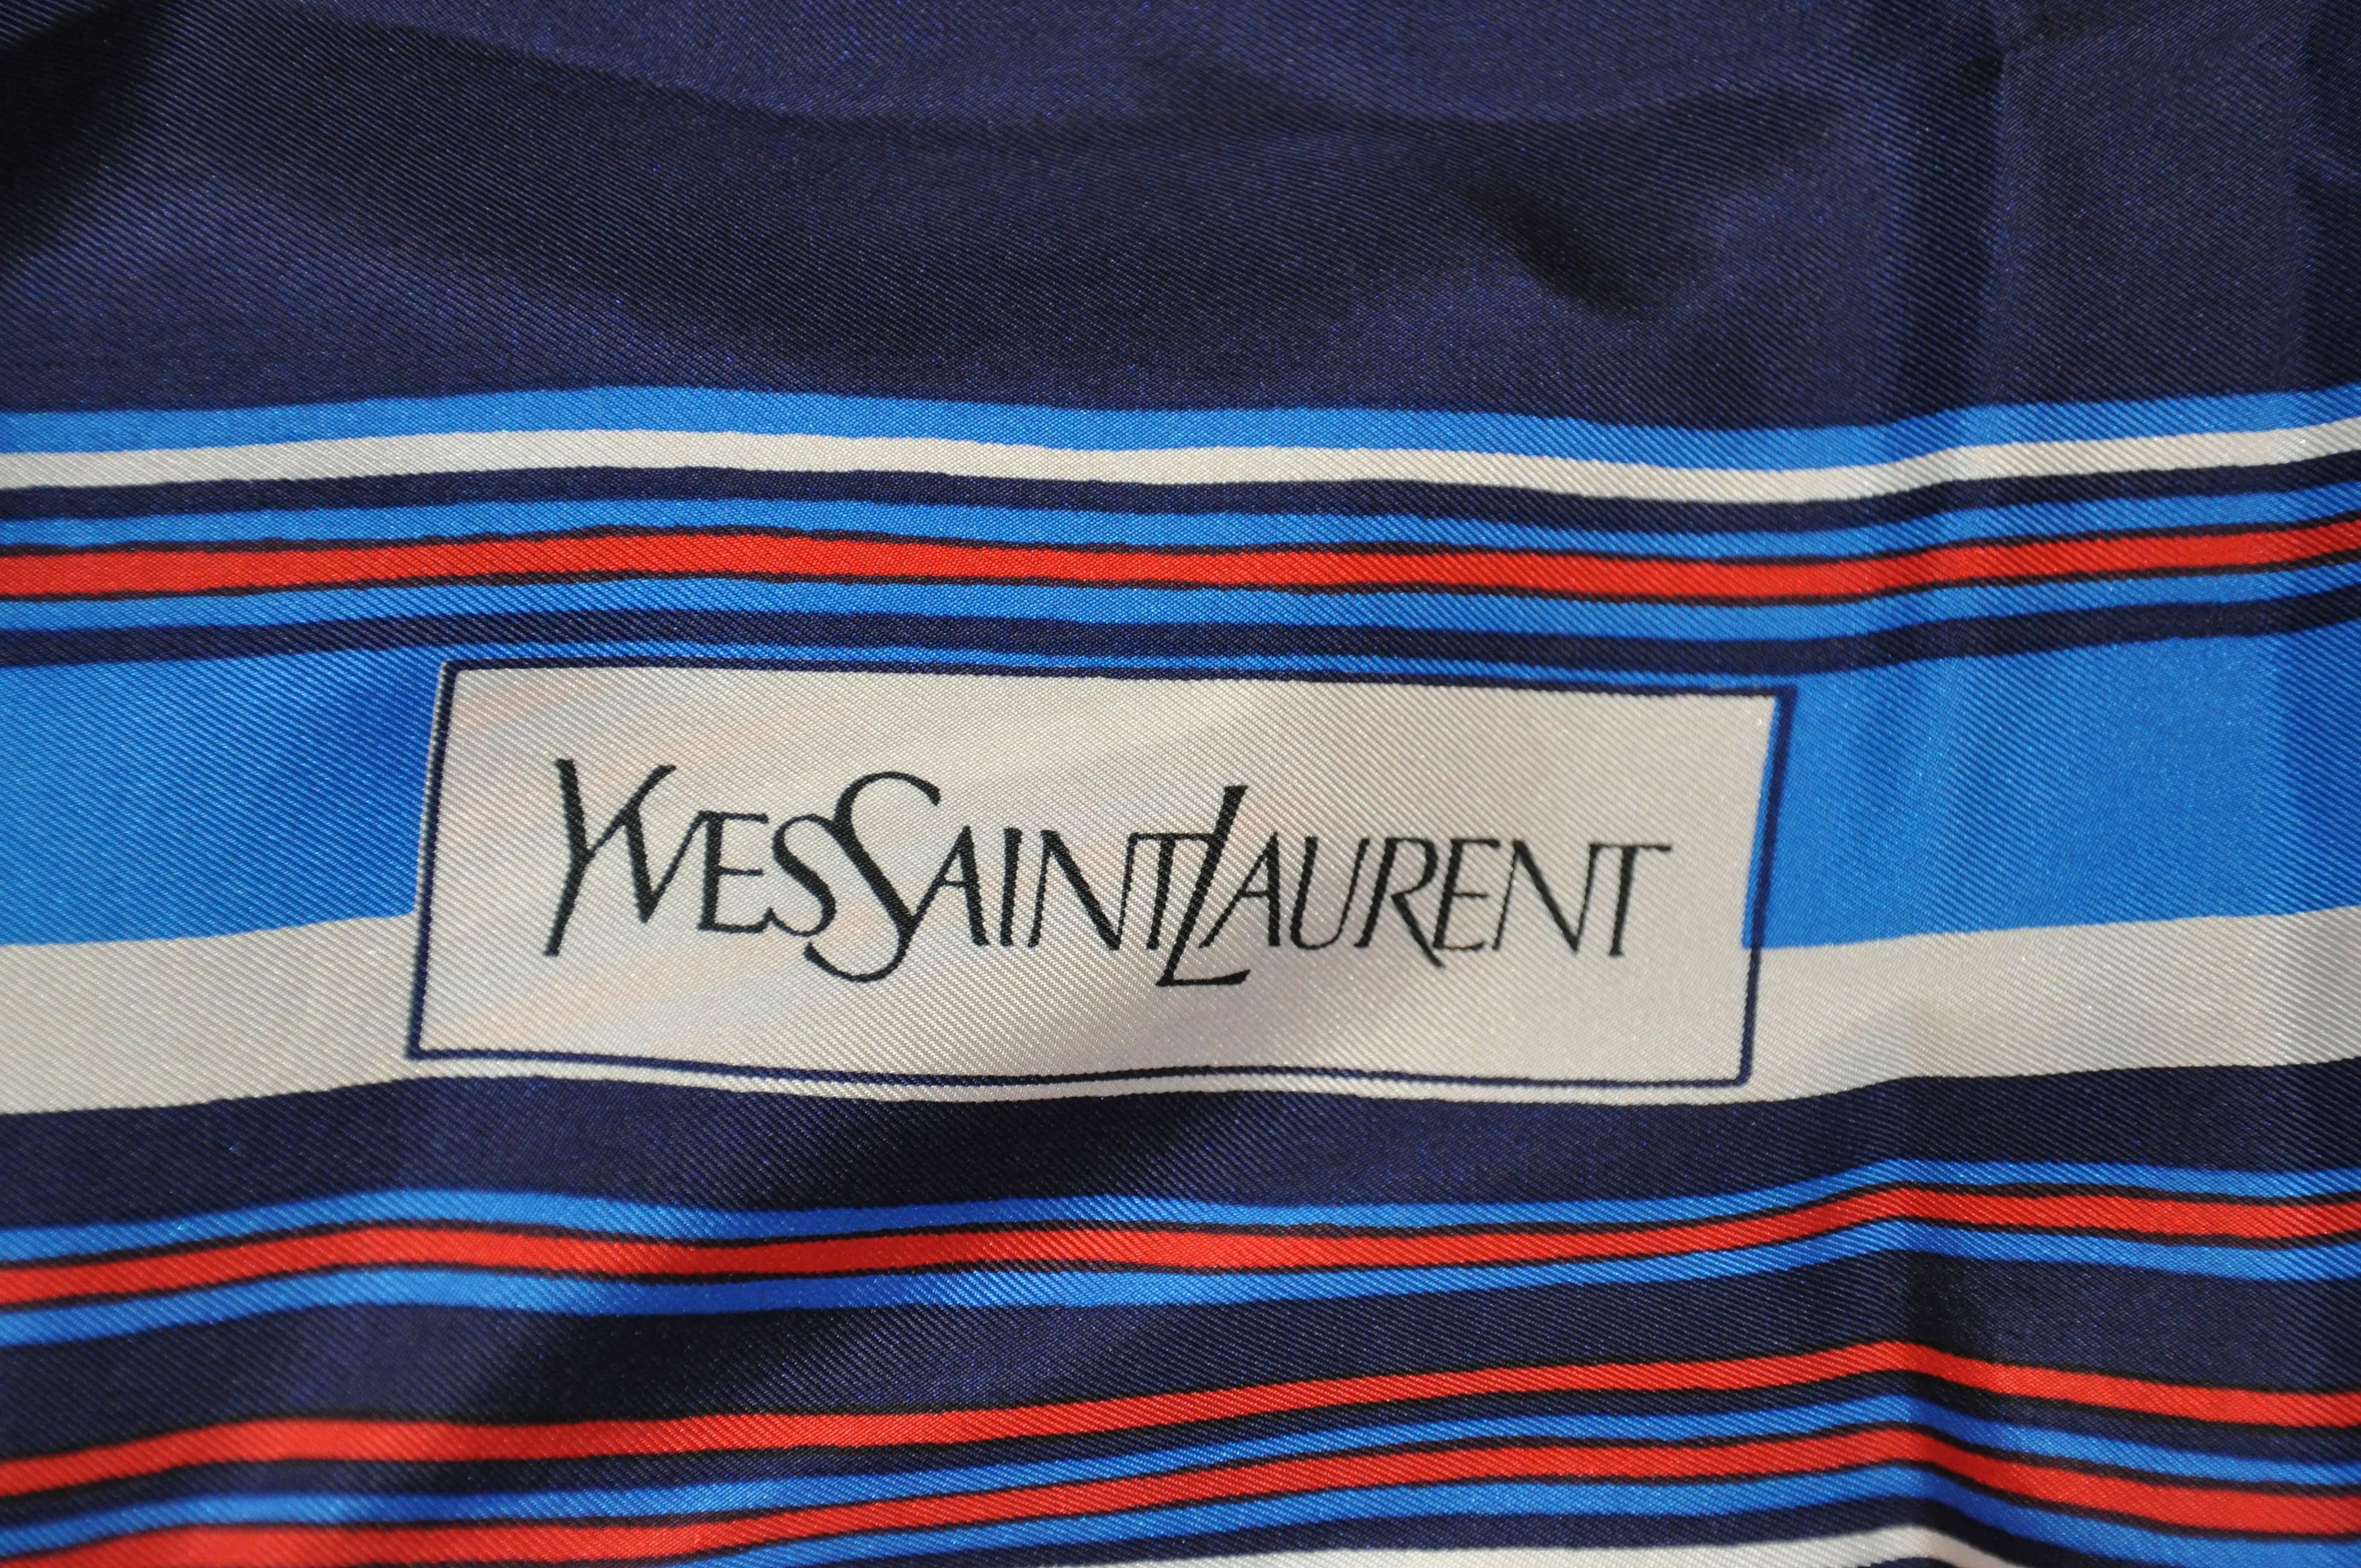         Yves Saint Laurent signature red white and blue silk scarf is accented with the famous logo measures 34